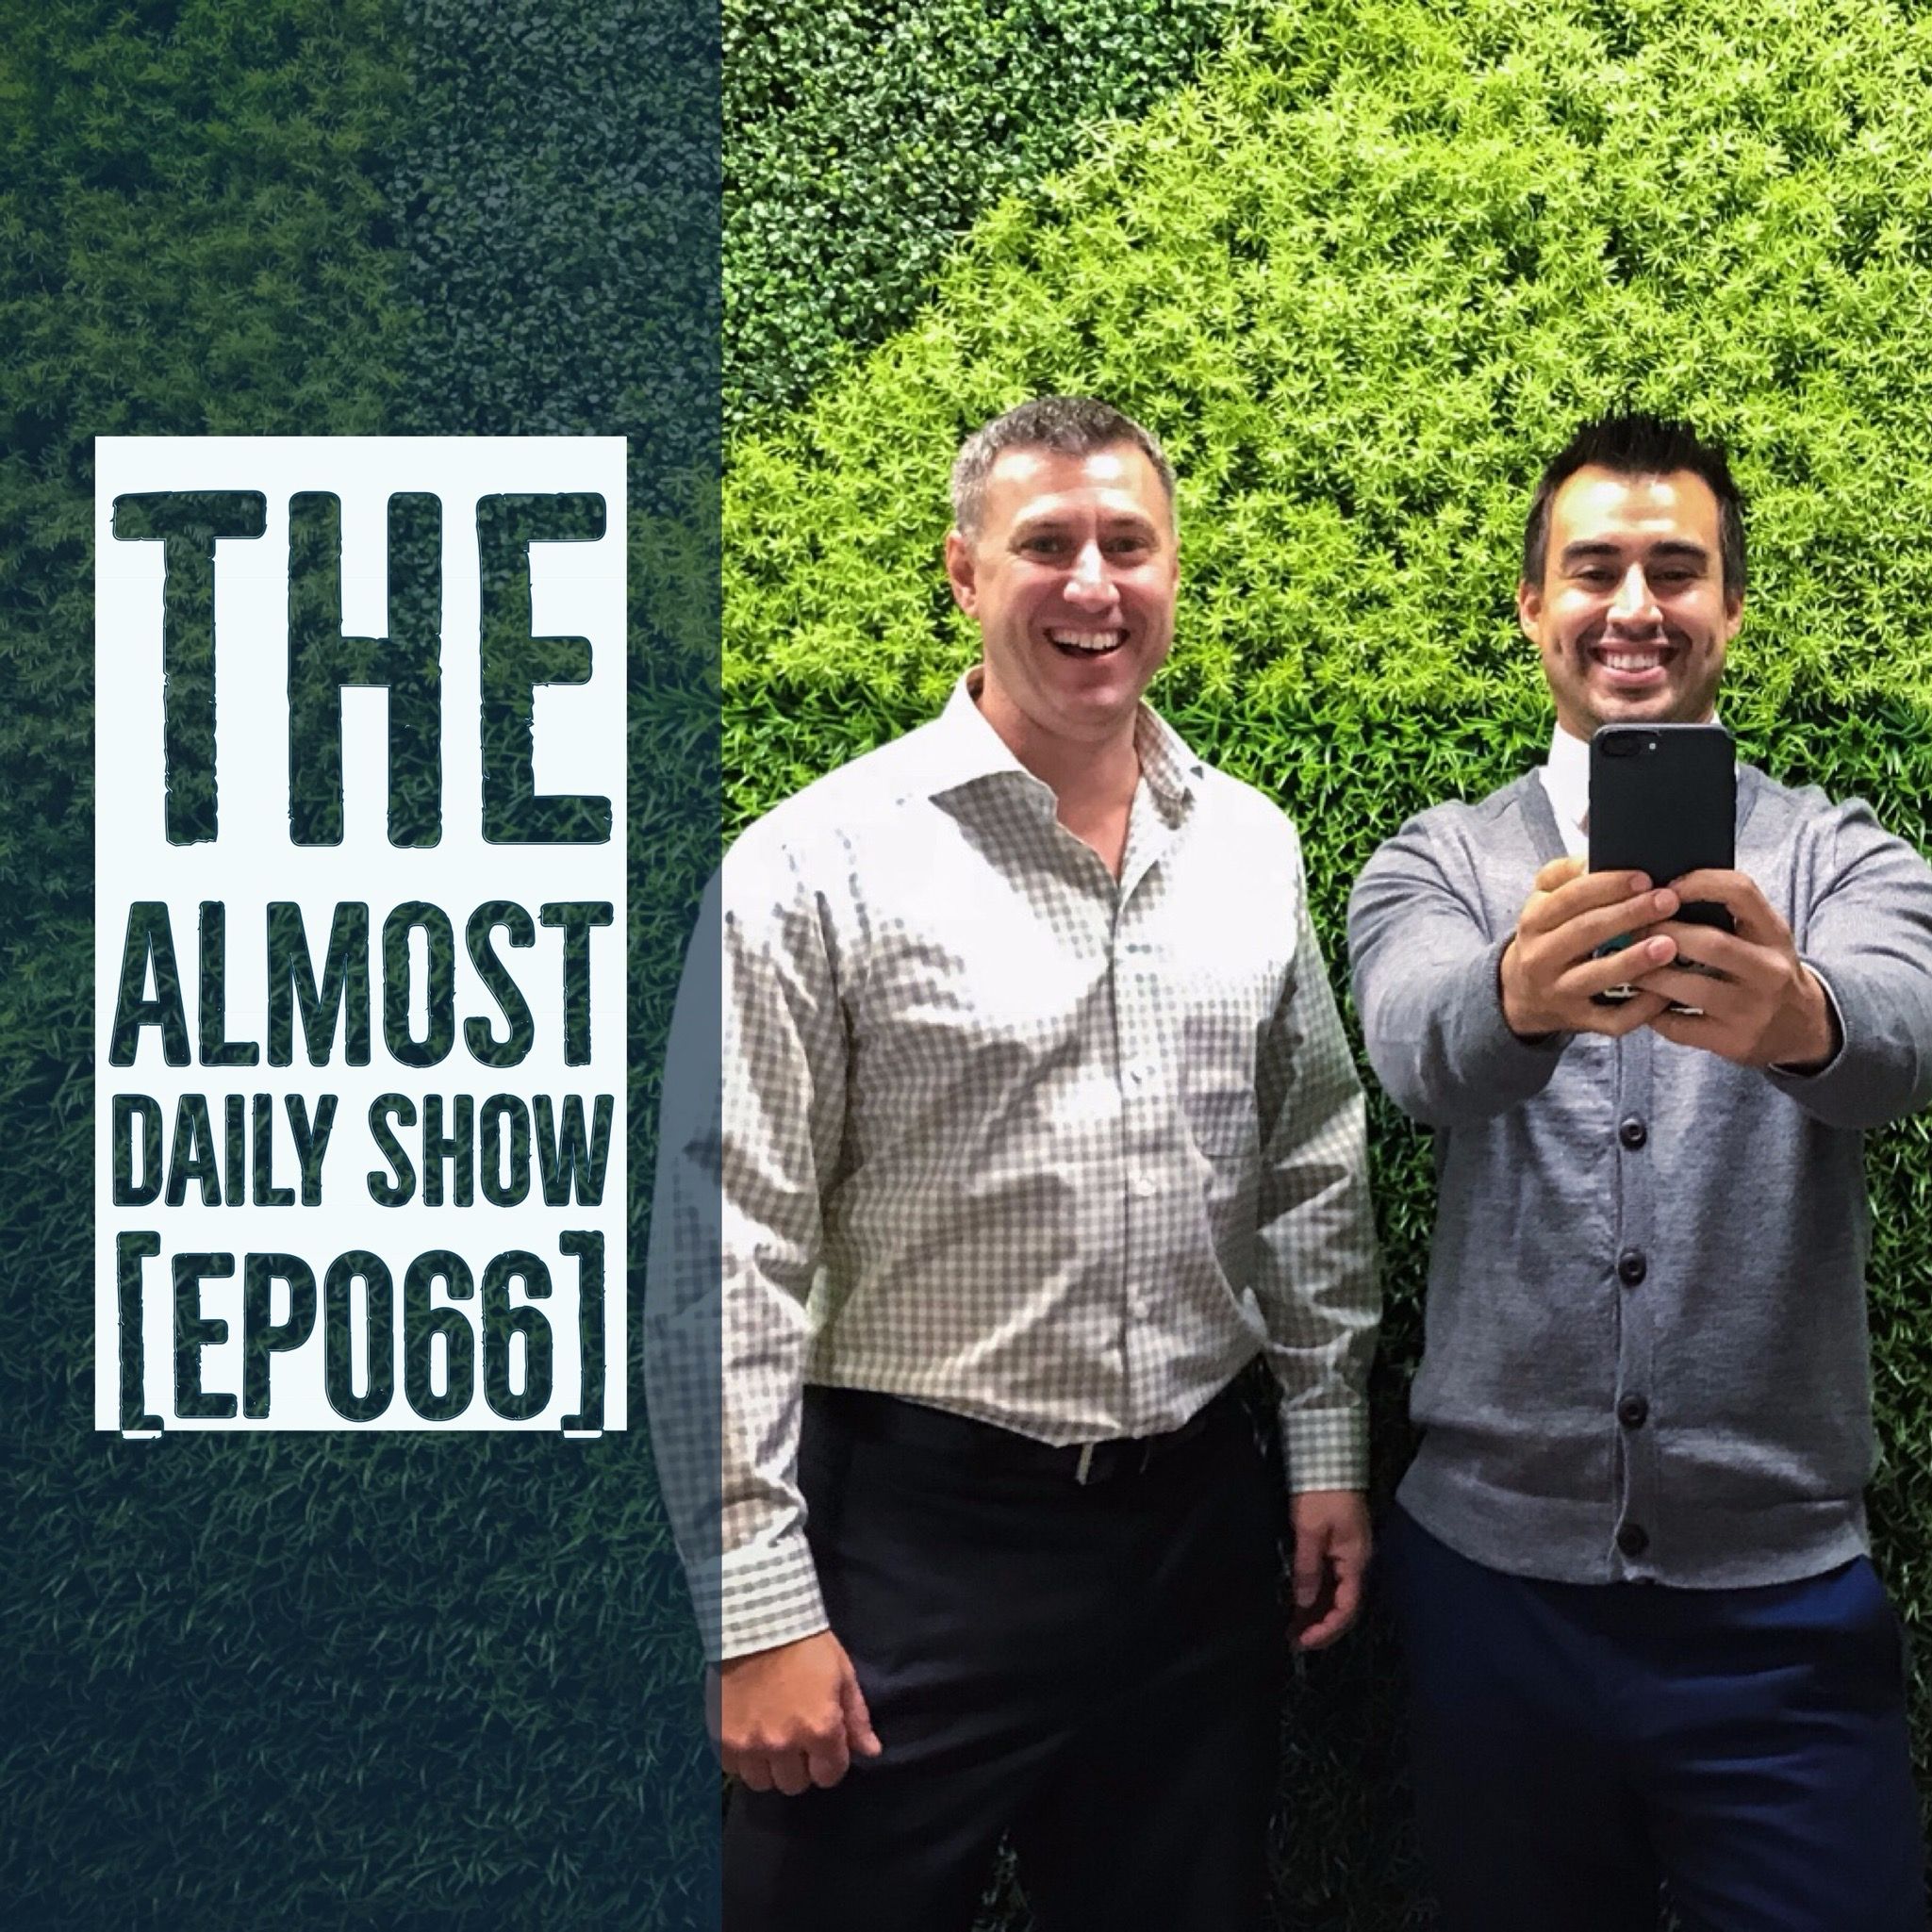 Hot Seat Thursdays with Joe From Olney CrossFit | The Almost Daily Show Ep 066